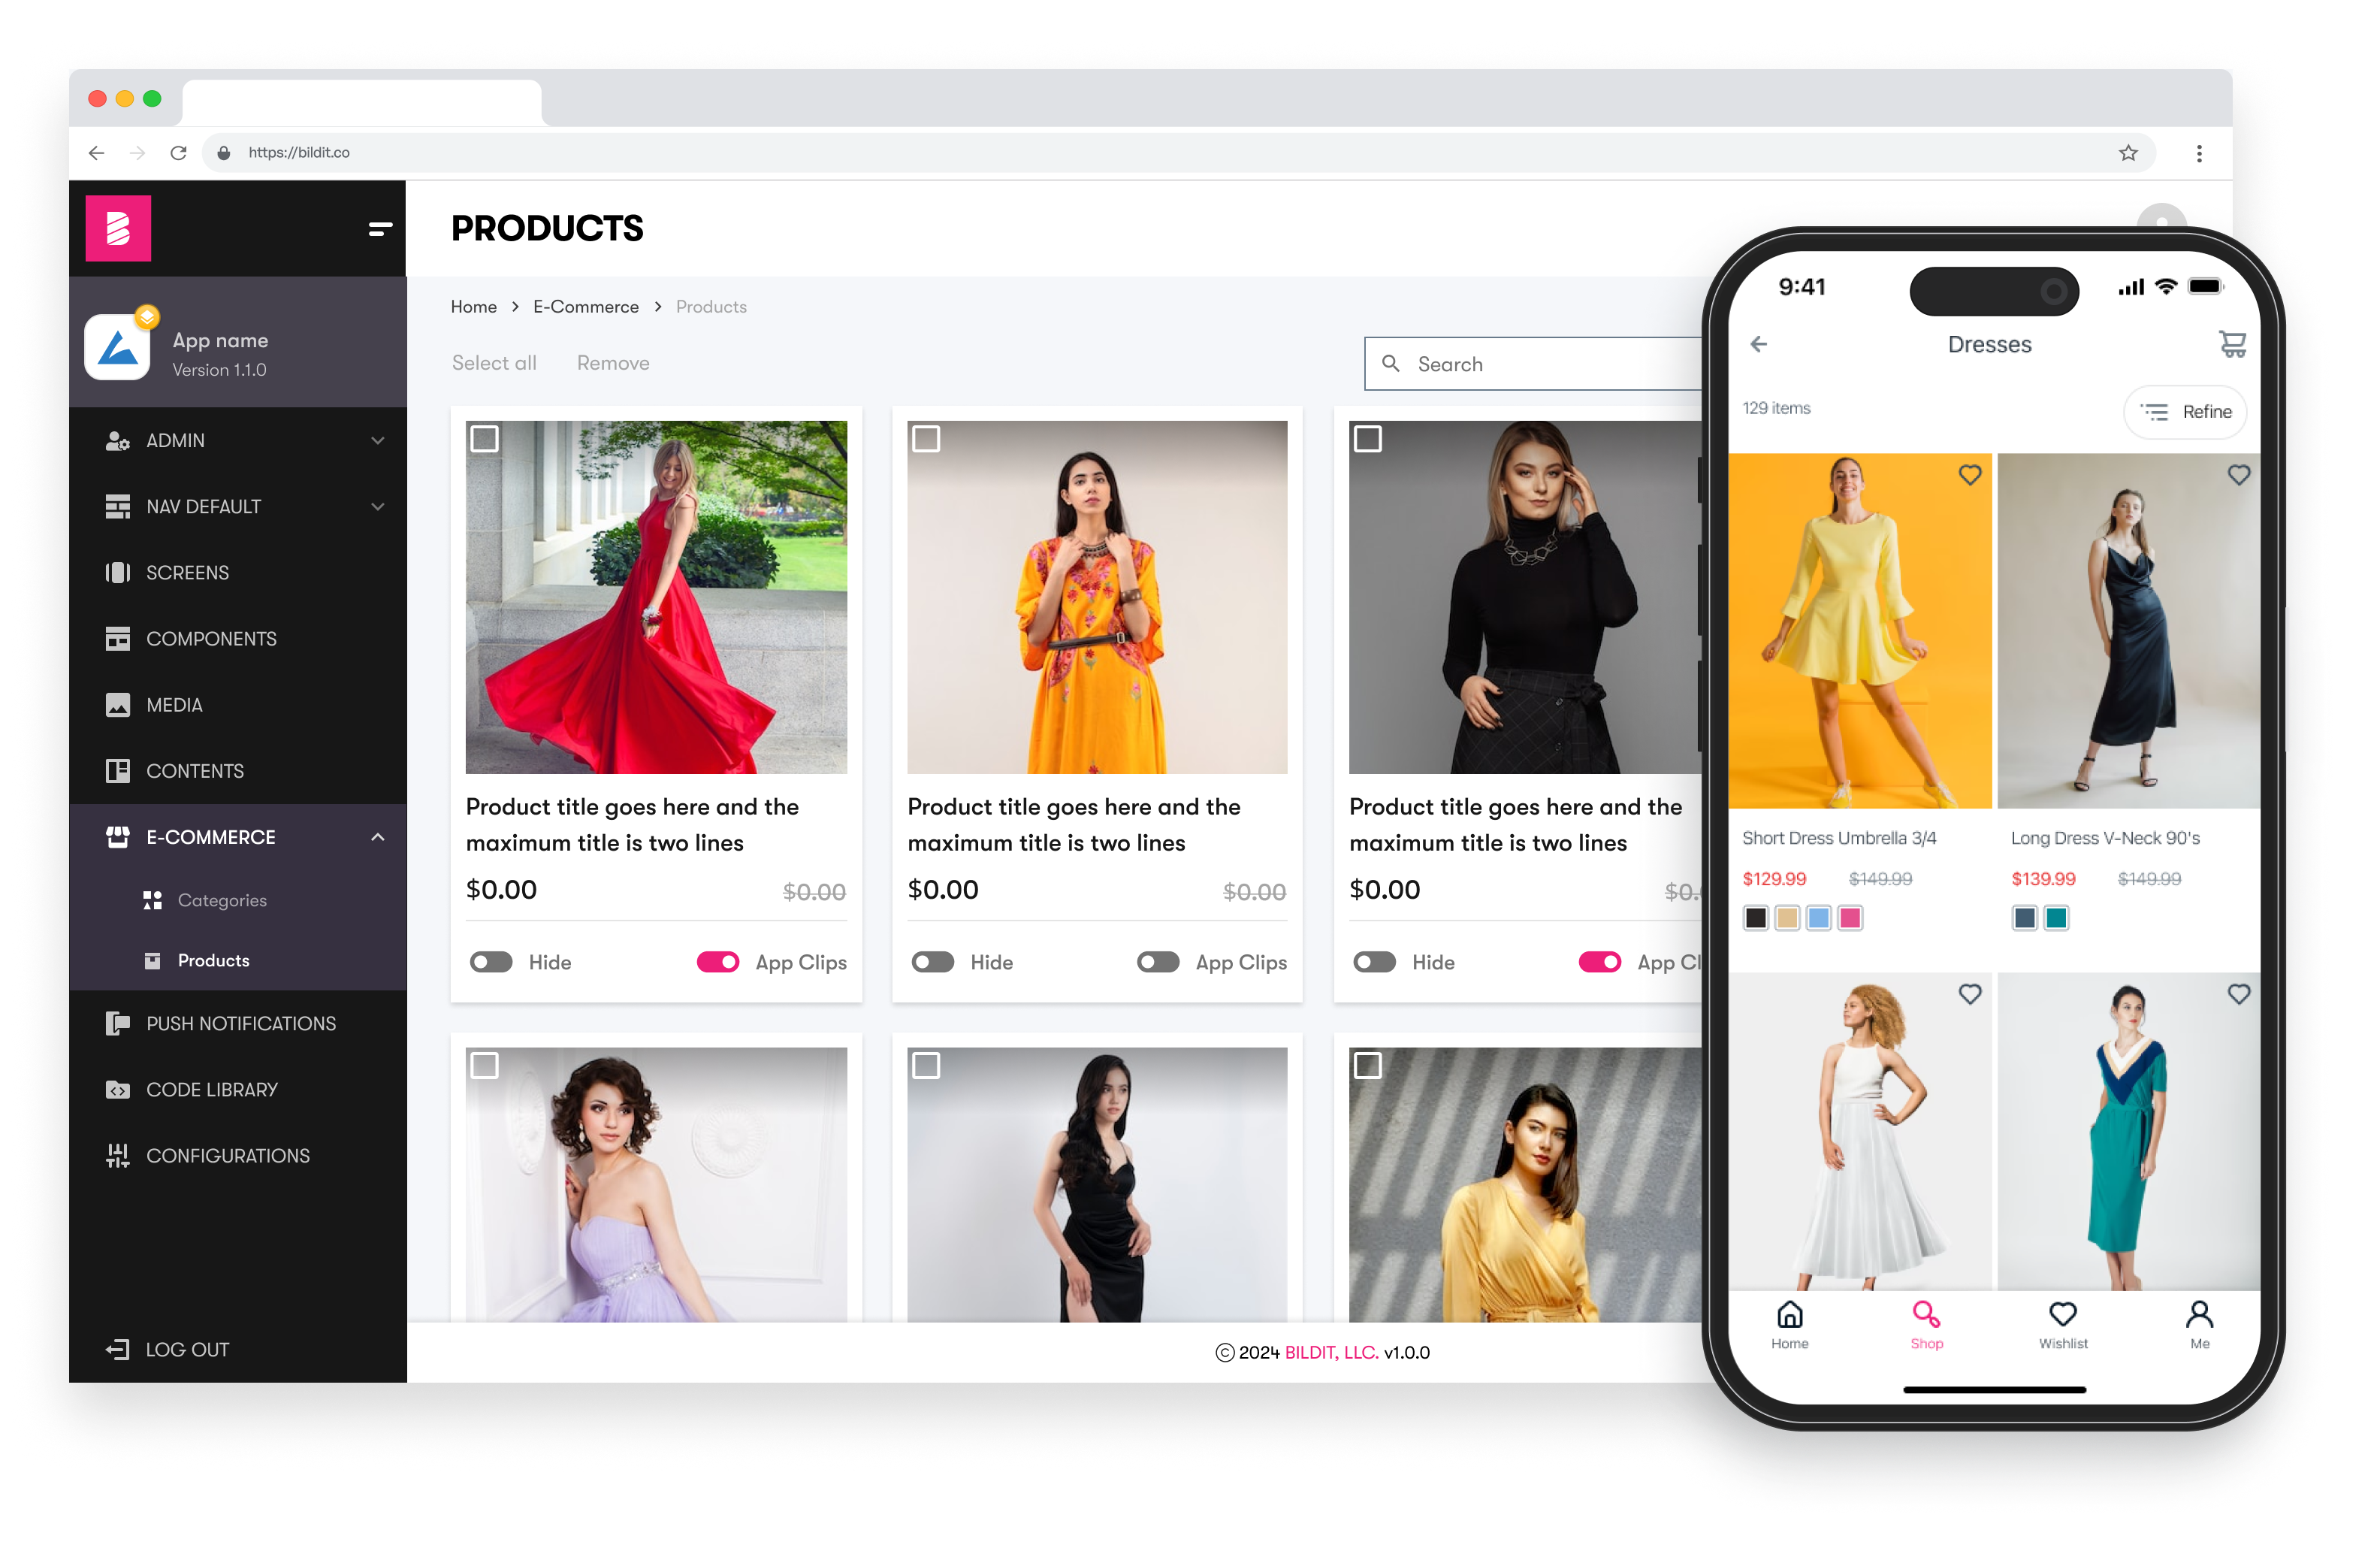 This image shows a computer screen and a smartphone screen displaying an e-commerce platform for women's dresses. On the computer, there's an administrative interface with a sidebar menu and a main area featuring images of dresses with placeholder text for product titles and prices. The smartphone displays a shopping app with a list of dresses, showing images, names, and prices, and navigation tabs at the bottom.